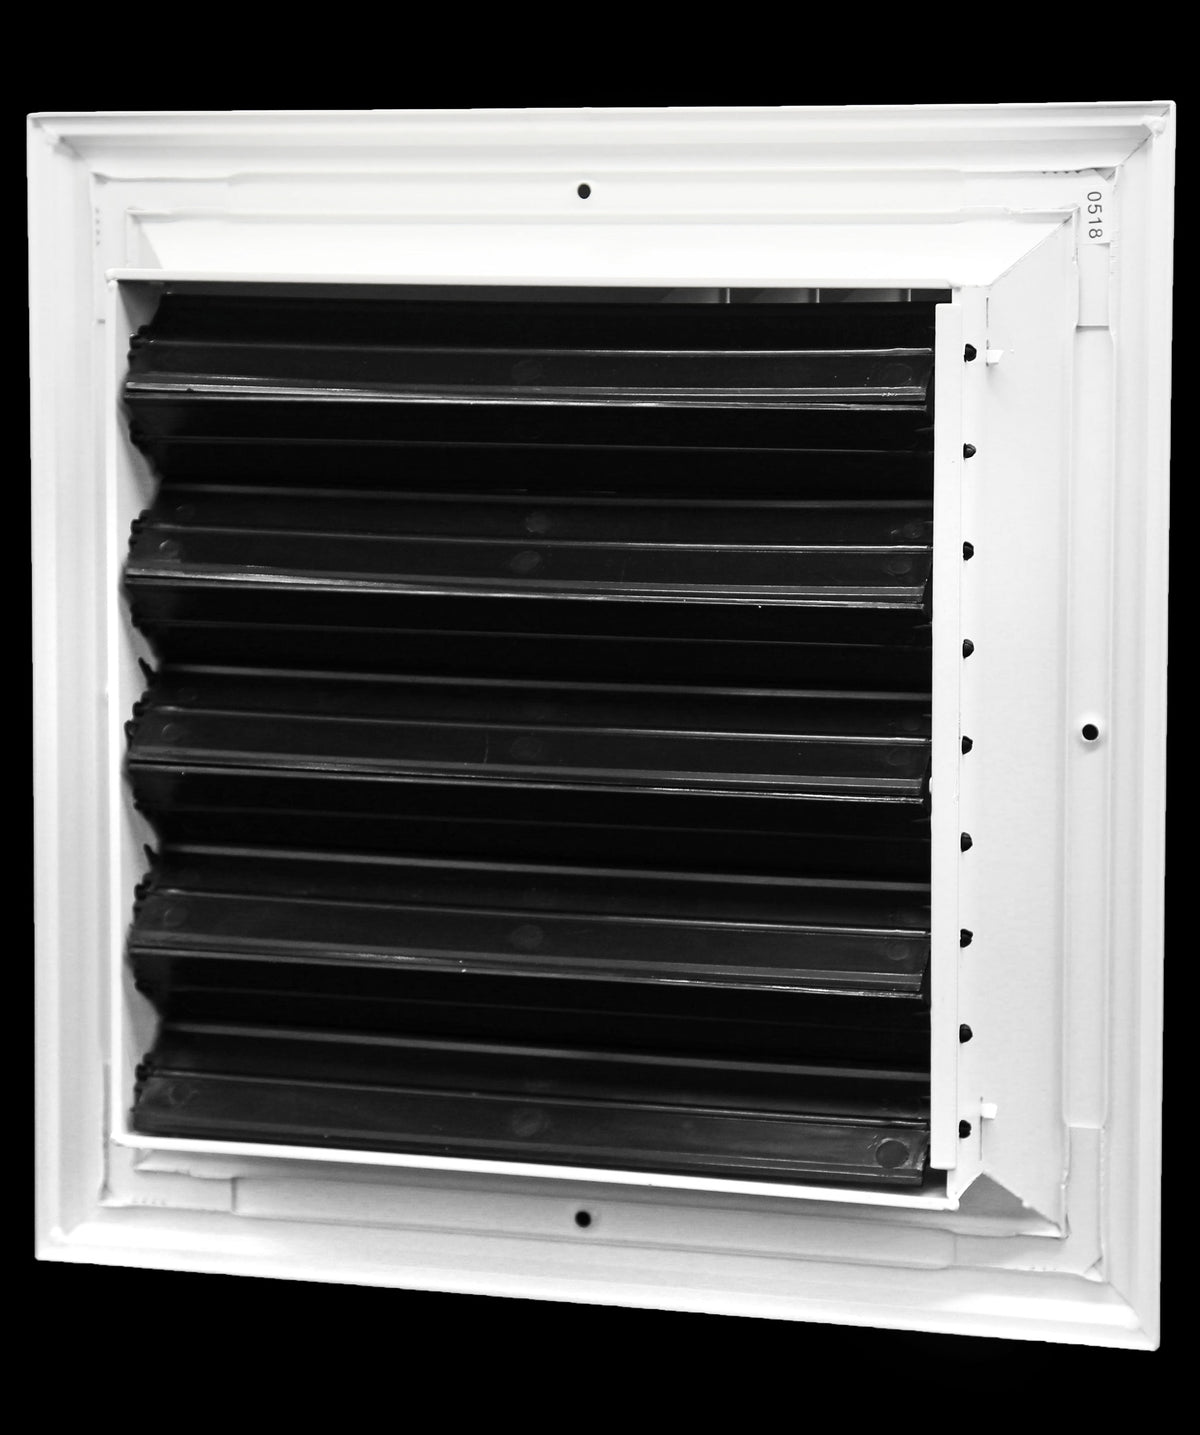 12&quot; x 12&quot; 4-WAY SUPPLY GRILLE - DUCT COVER &amp; DIFFUSER - LOW NOISE - For Ceiling - With Opposing Damper Blades